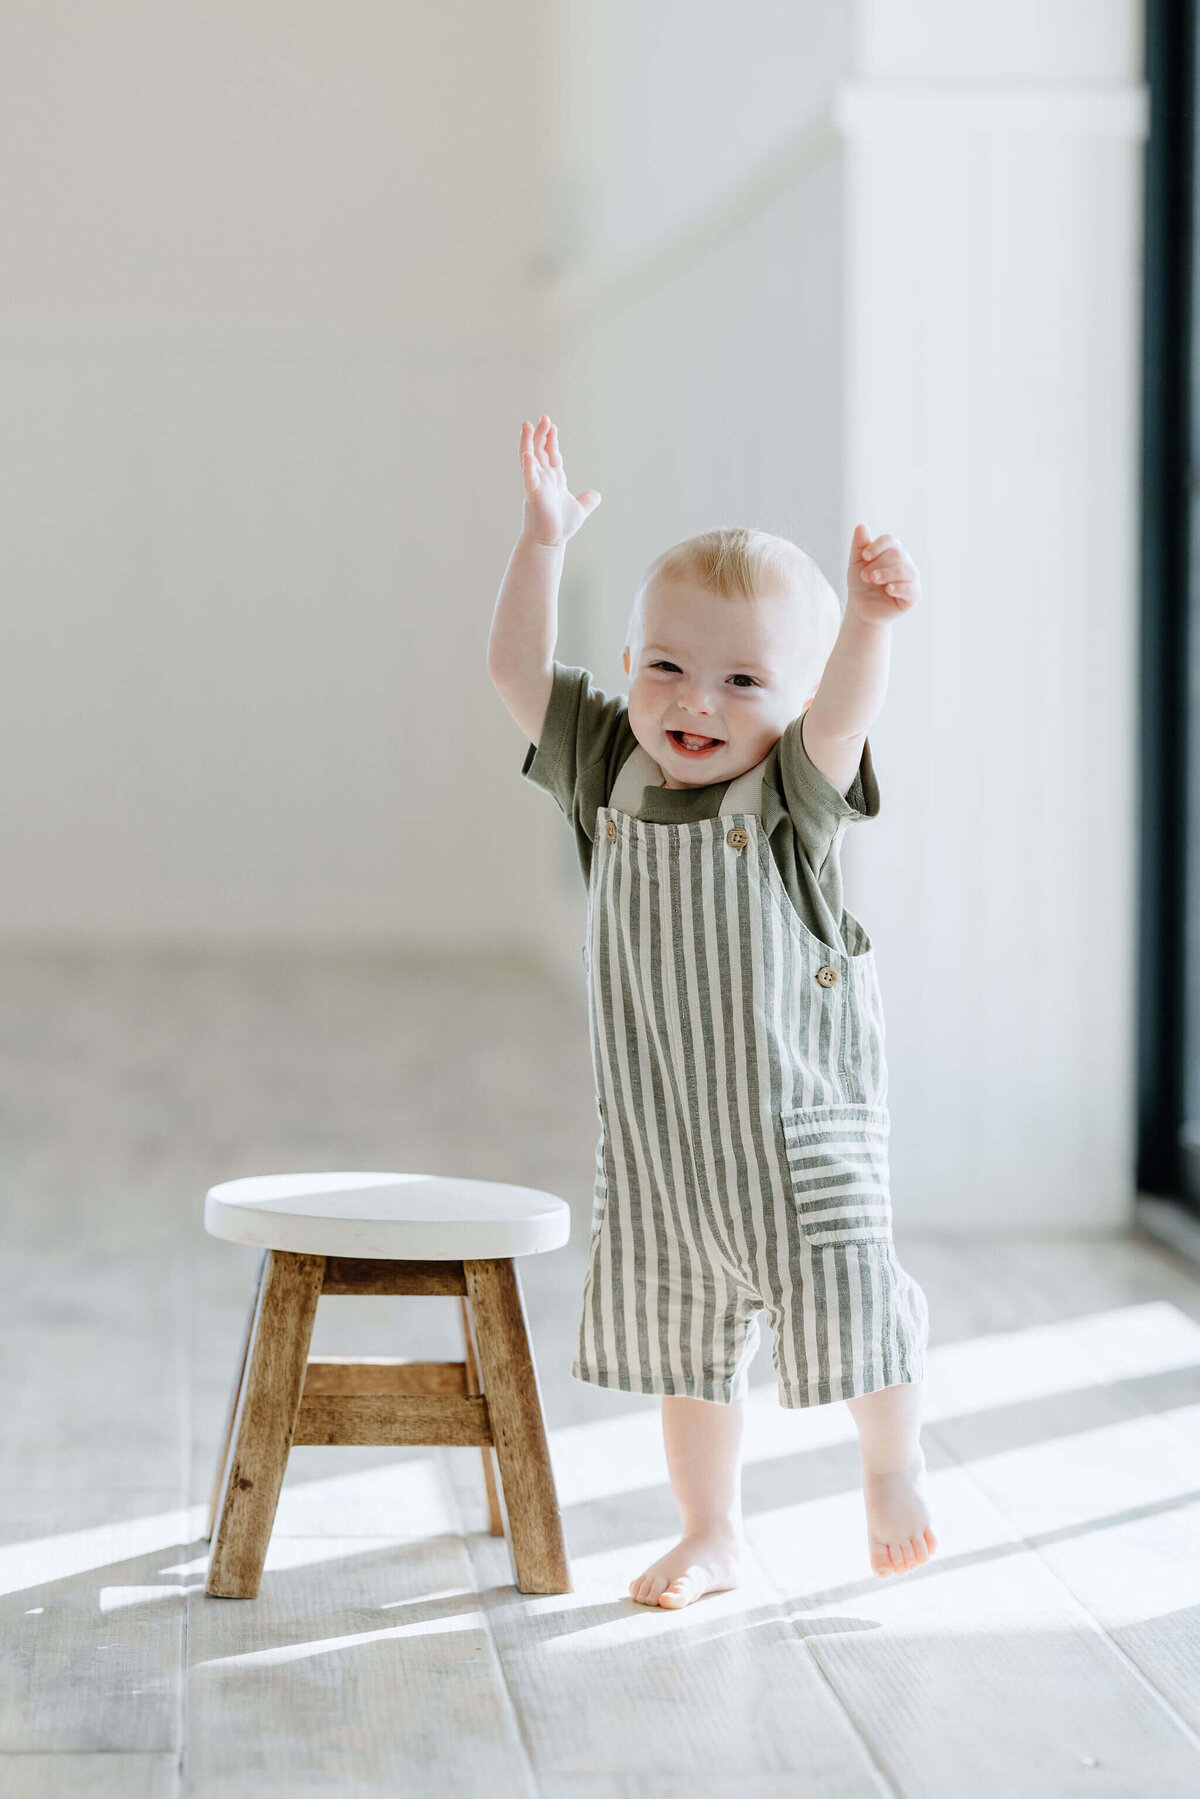 One year old son in stripped overalls and green shirt standing by wooden stool